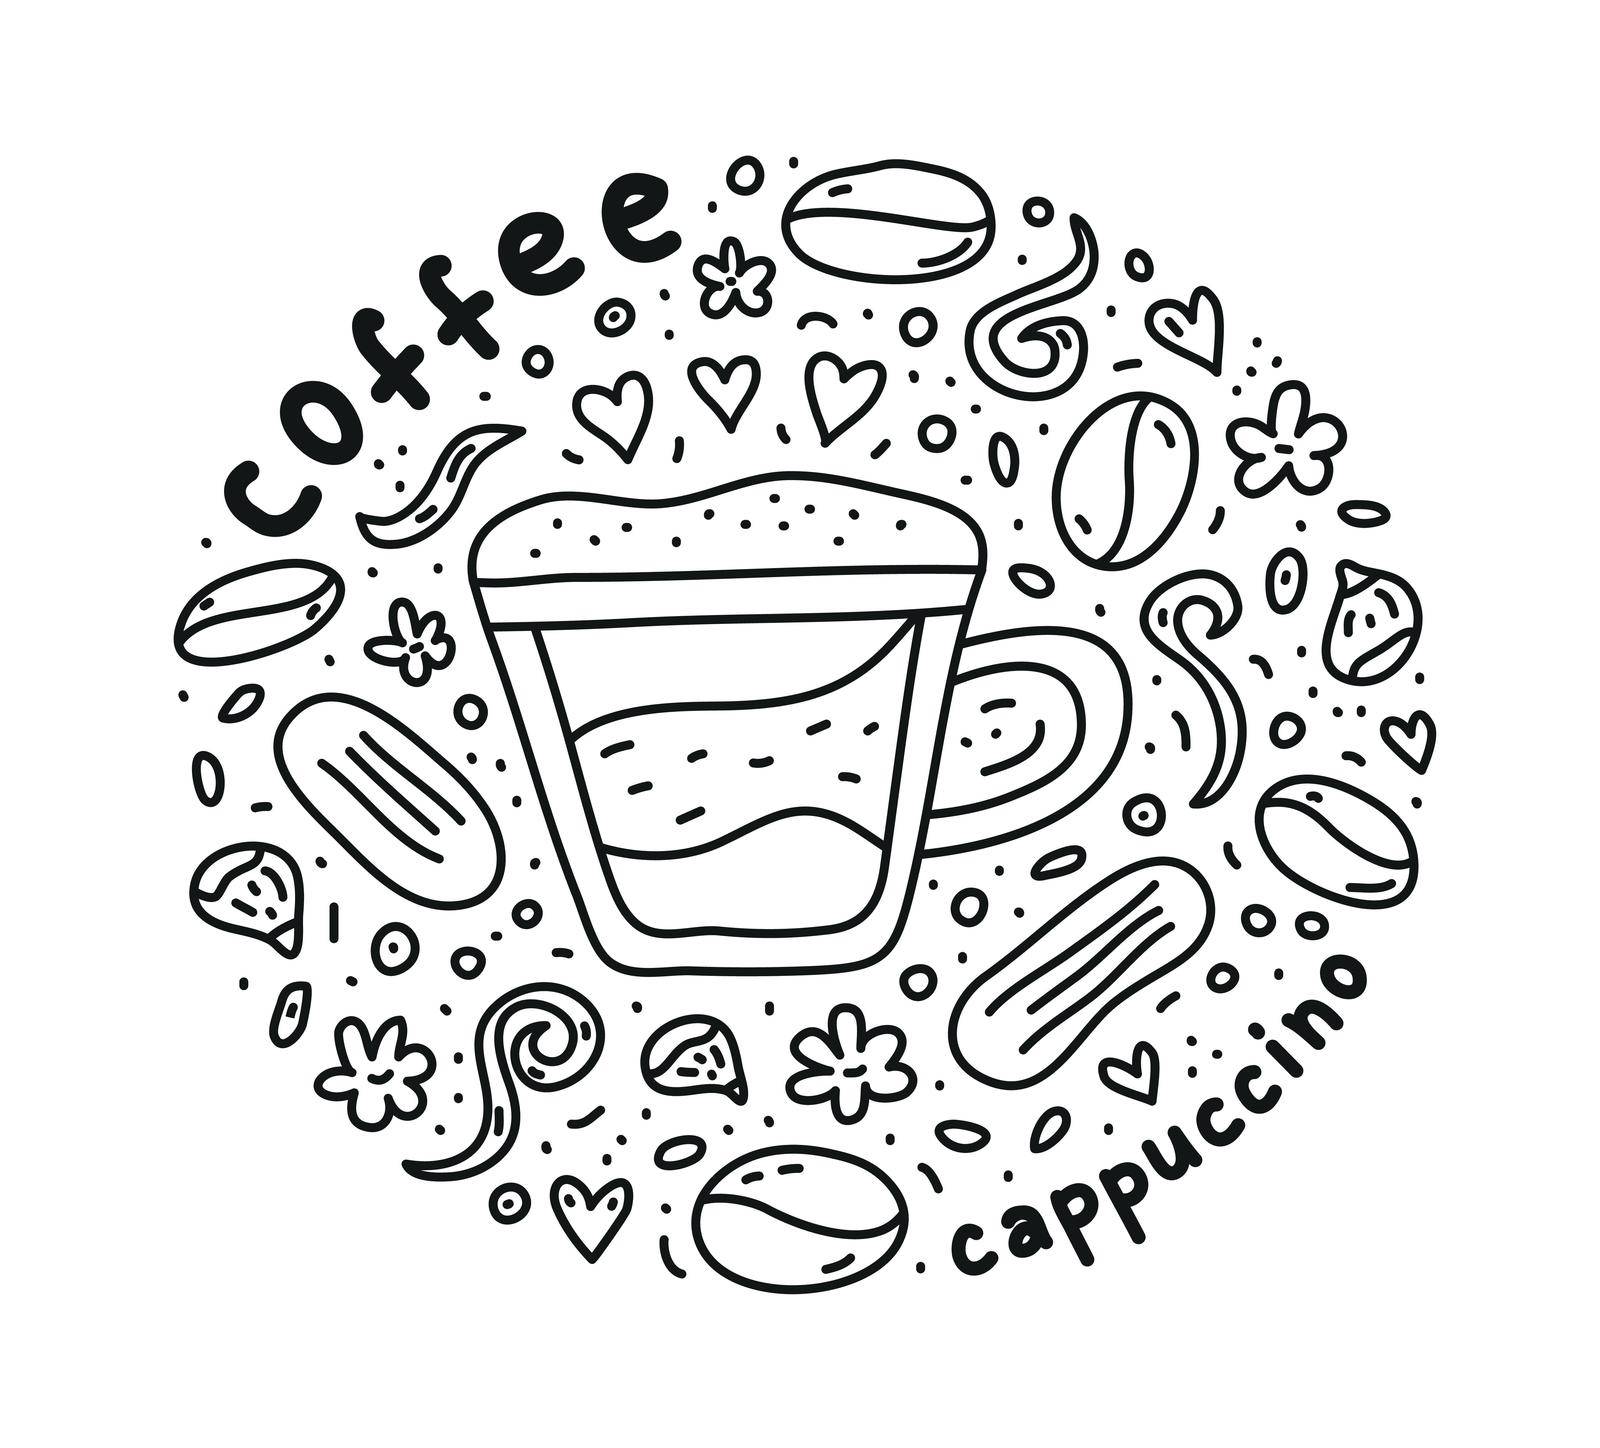 Poster with cute doodle cappuccino coffee drink and beans, cookies, spices, dots around.